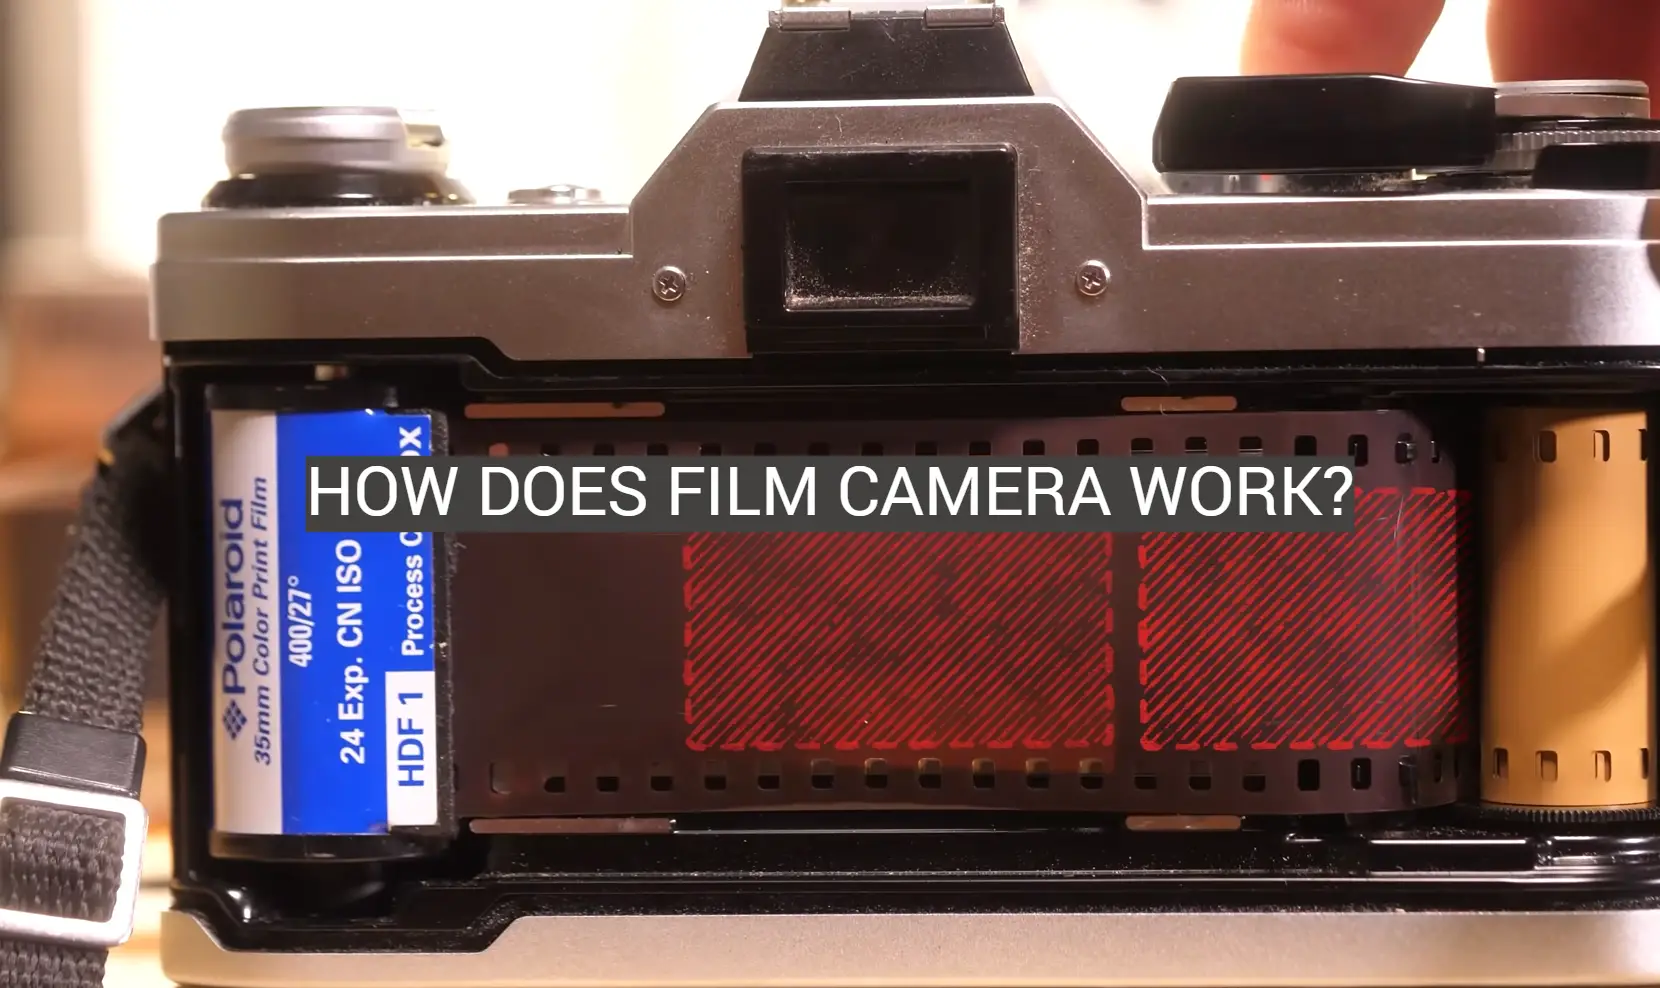 How Does Film Camera Work?